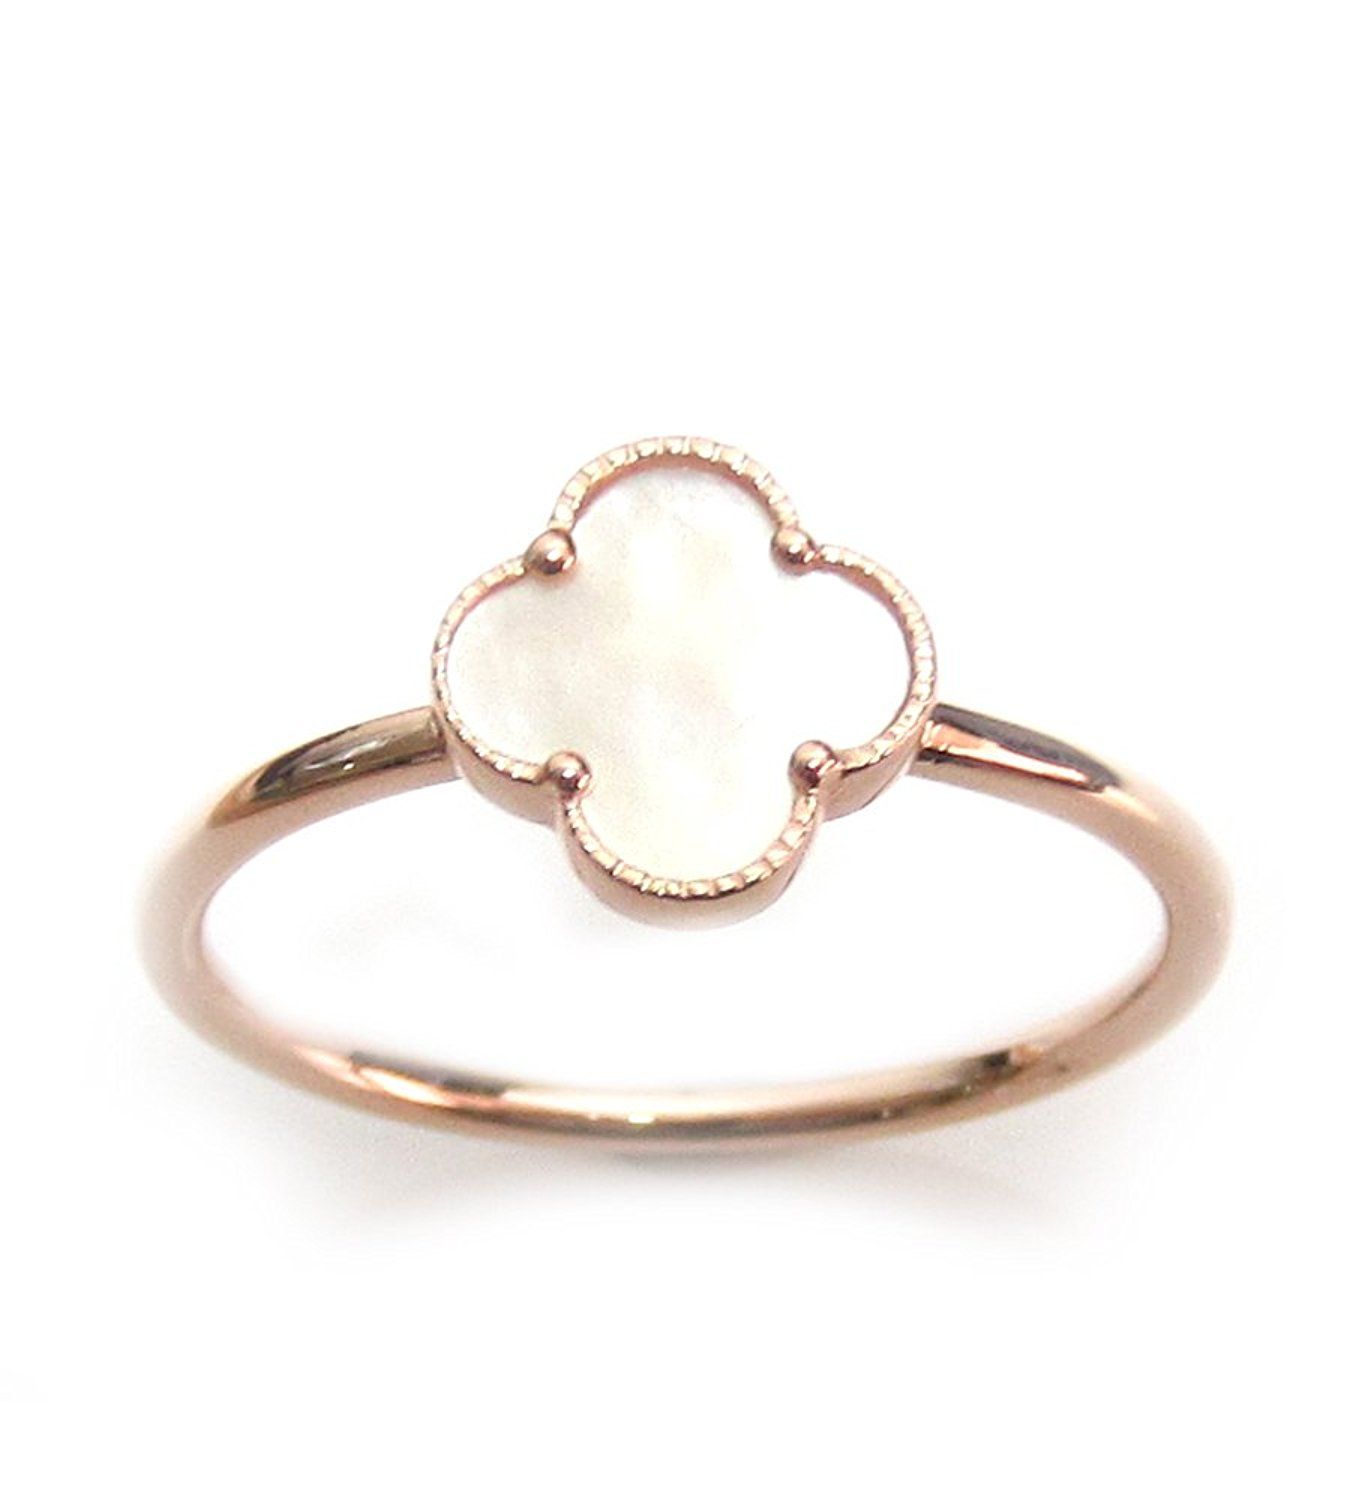 Cheap 4 Clover Ring, Find 4 Clover Ring Deals On Line At Alibaba Regarding Most Up To Date Dangling Four Leaf Clover Rings (Gallery 13 of 25)